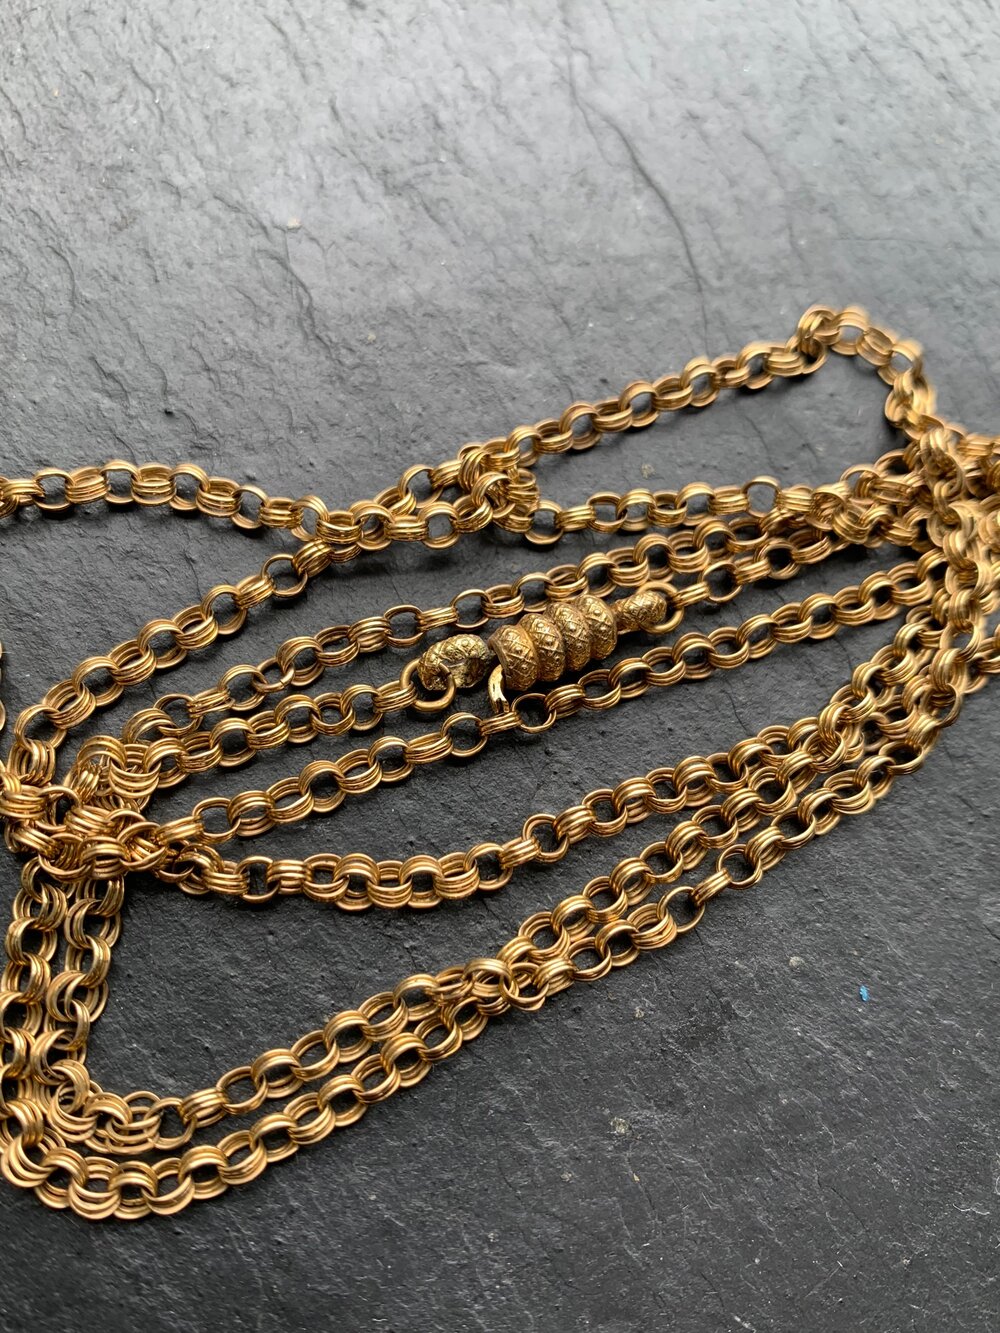 Antique 9ct yellow gold chain necklace with barrel clasp — Gembank1973